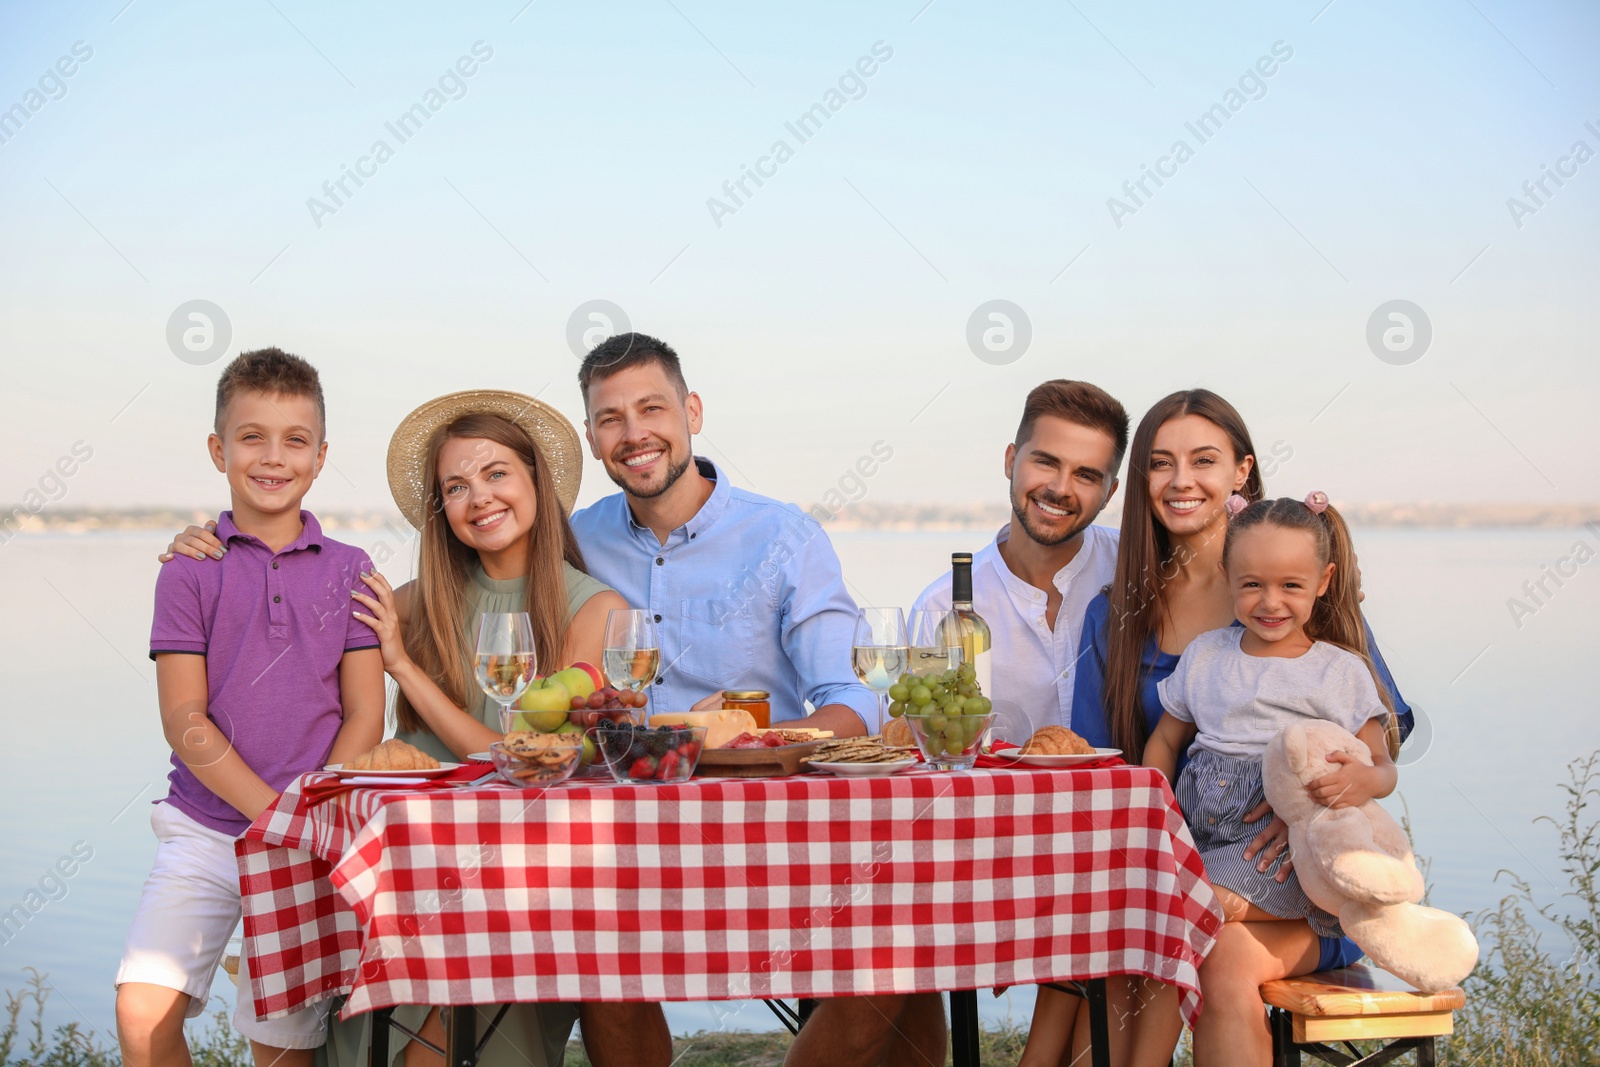 Photo of Happy families with little children at picnic table outdoors